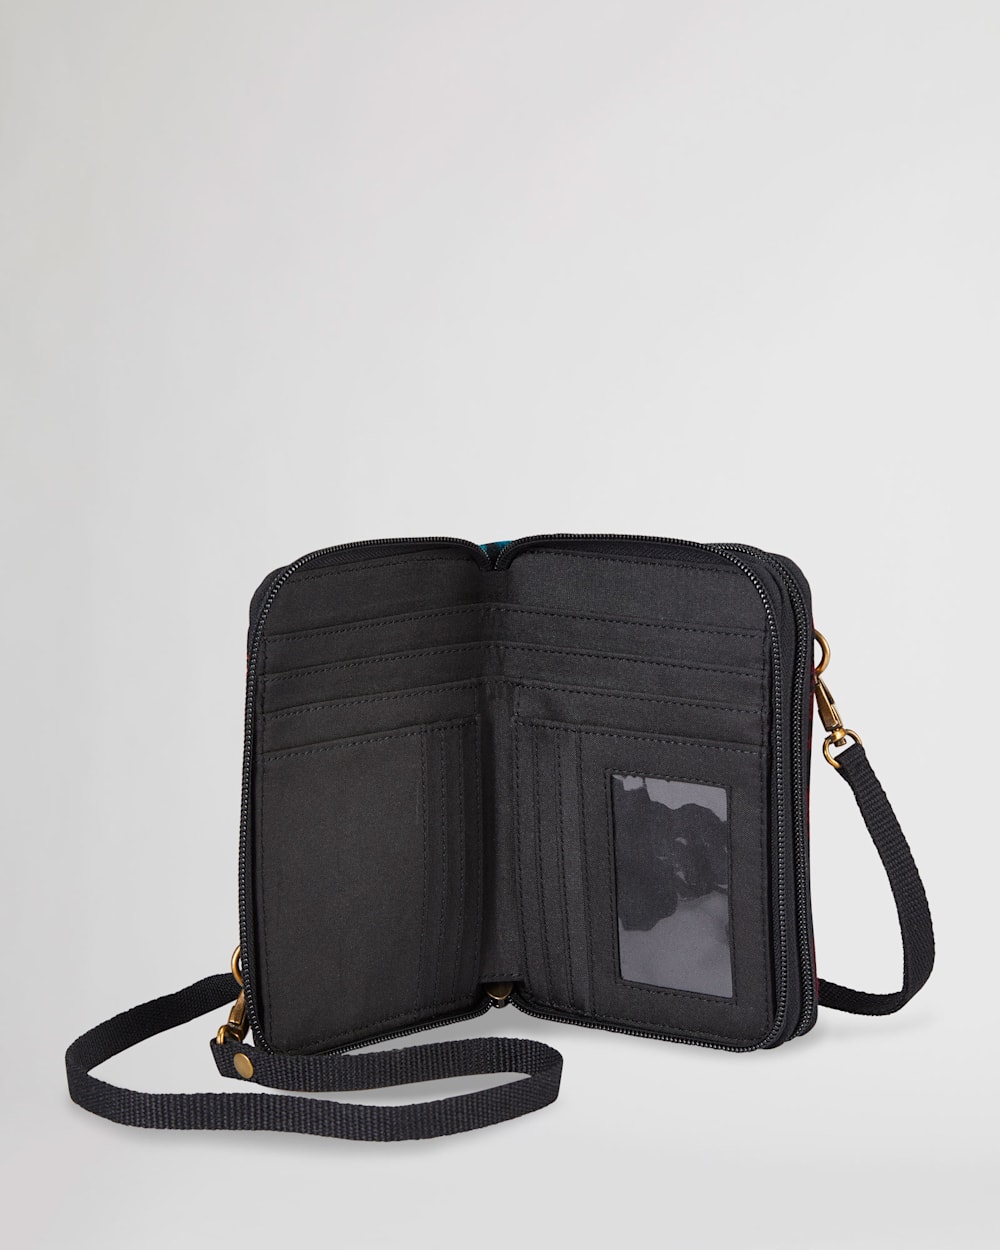 ALTERNATE VIEW OF CROSSBODY ORGANIZER IN BLACK ECHO CANYON image number 3